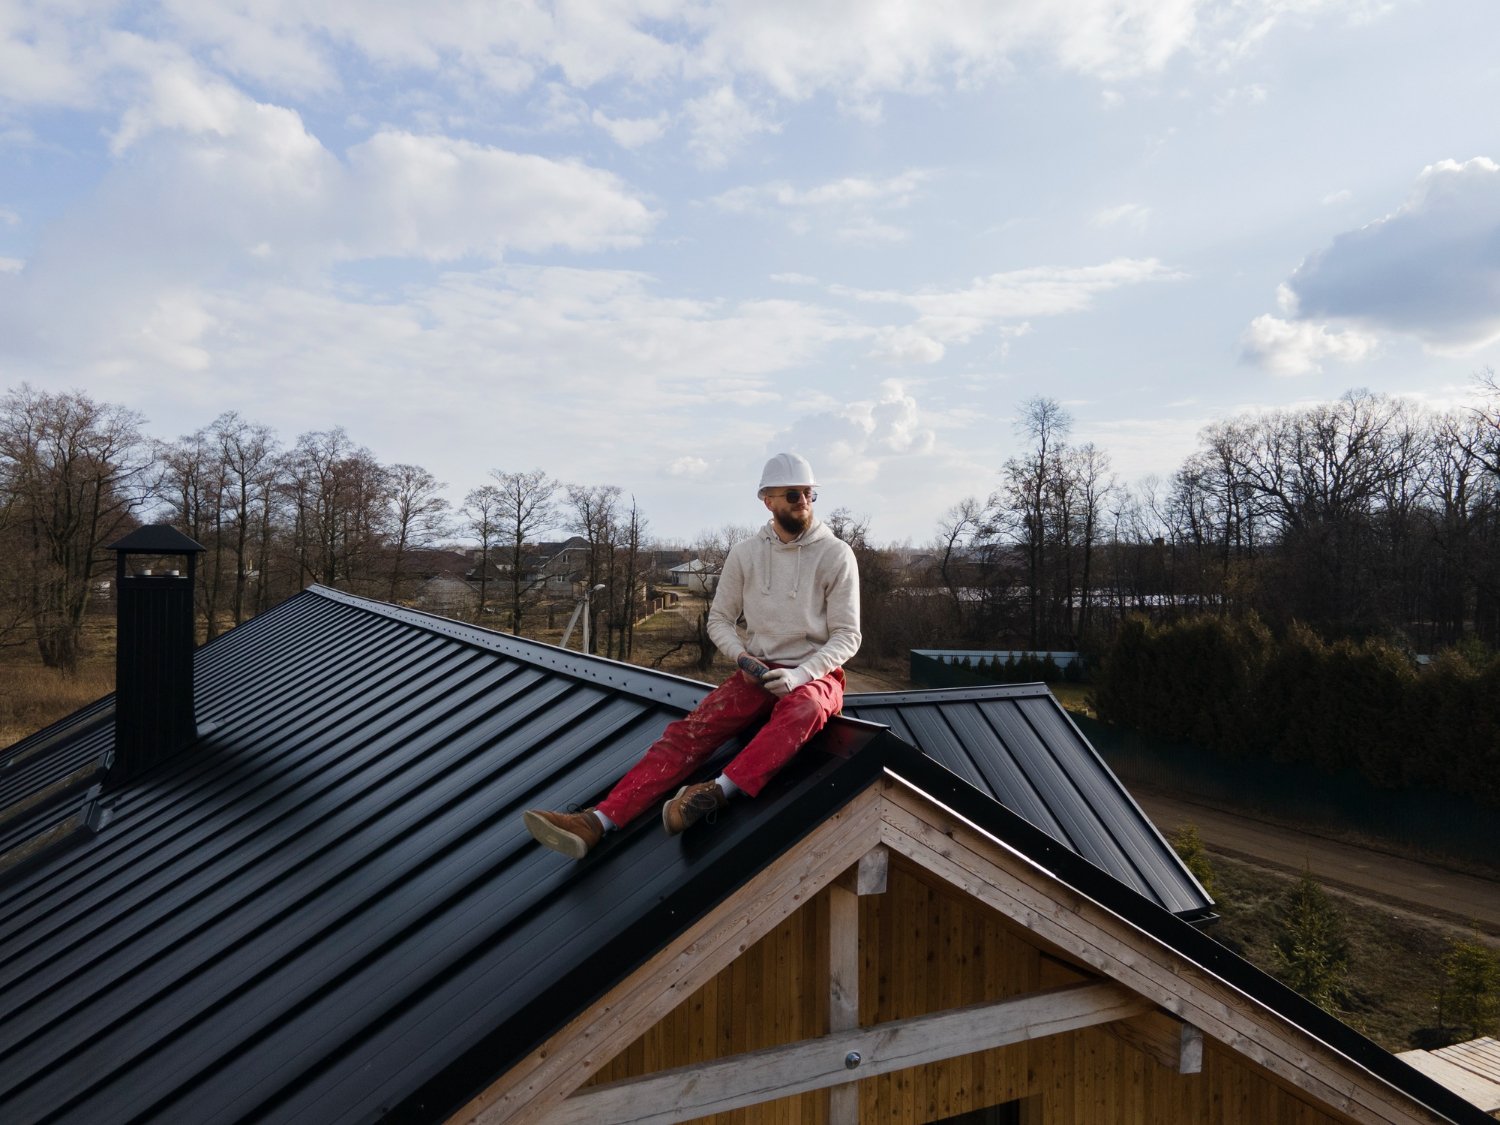 Why Choose Professional Roofing Companies for Your Home